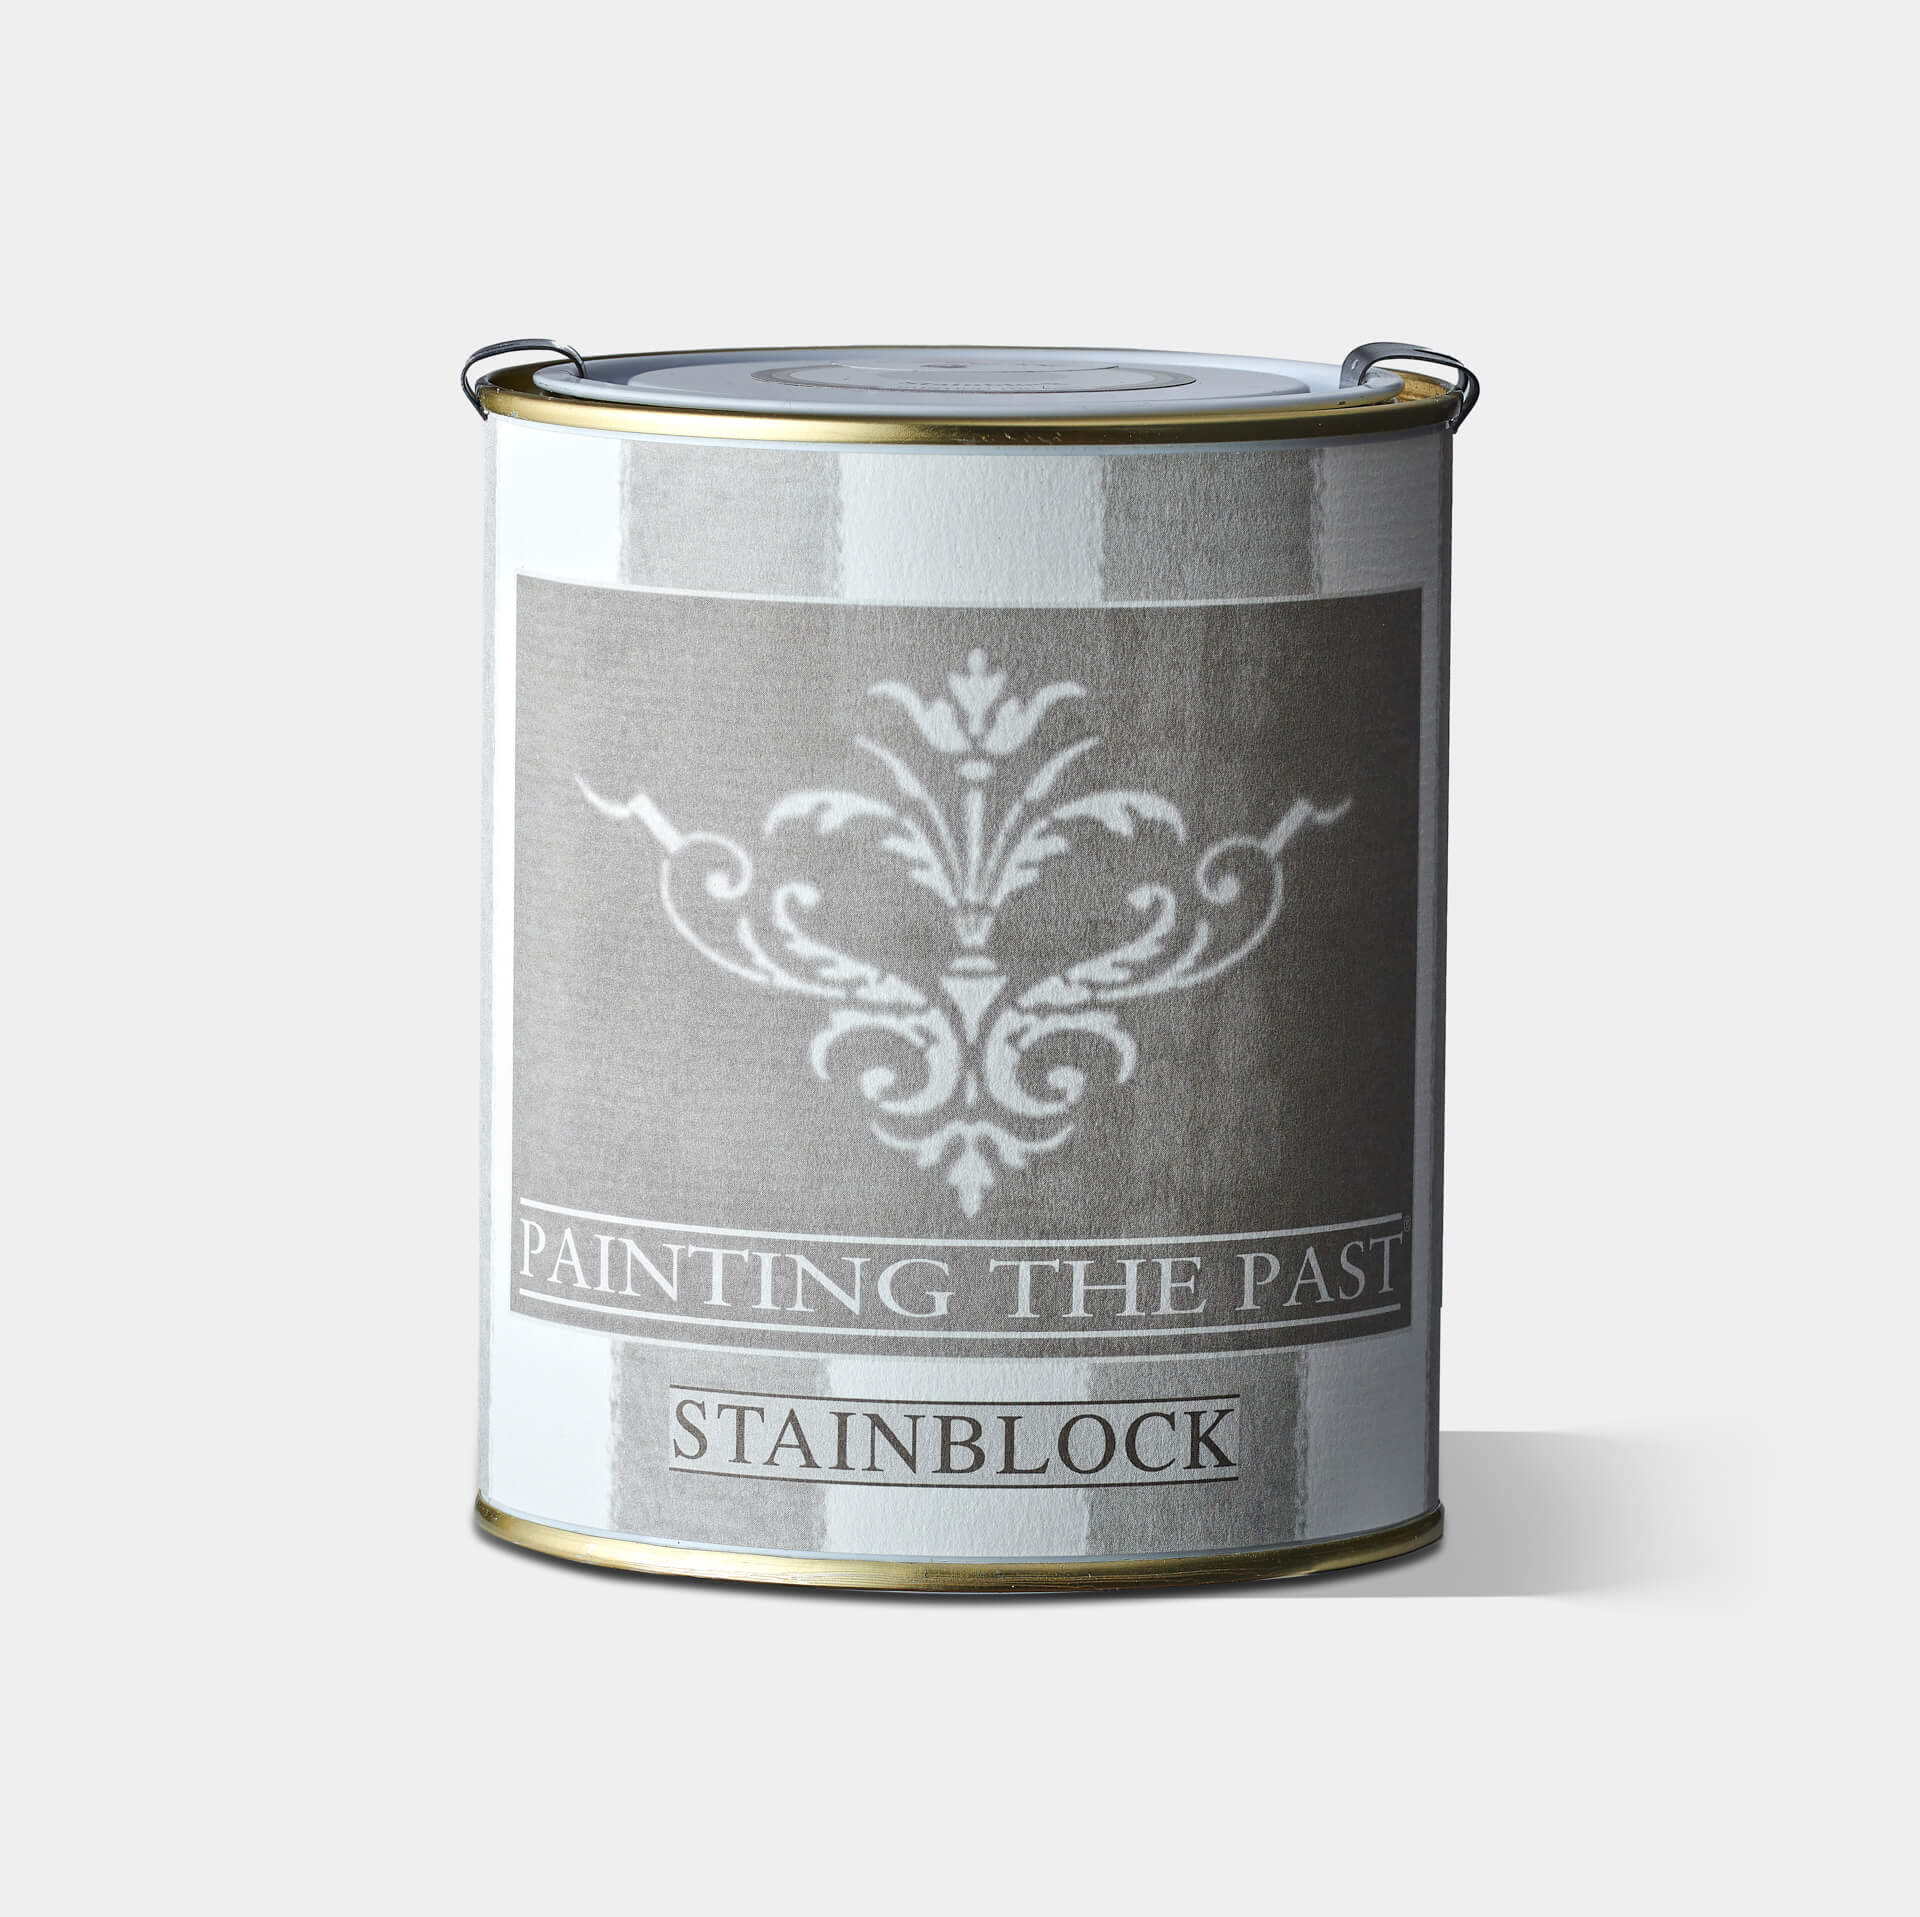 Painting the Past Stainblock